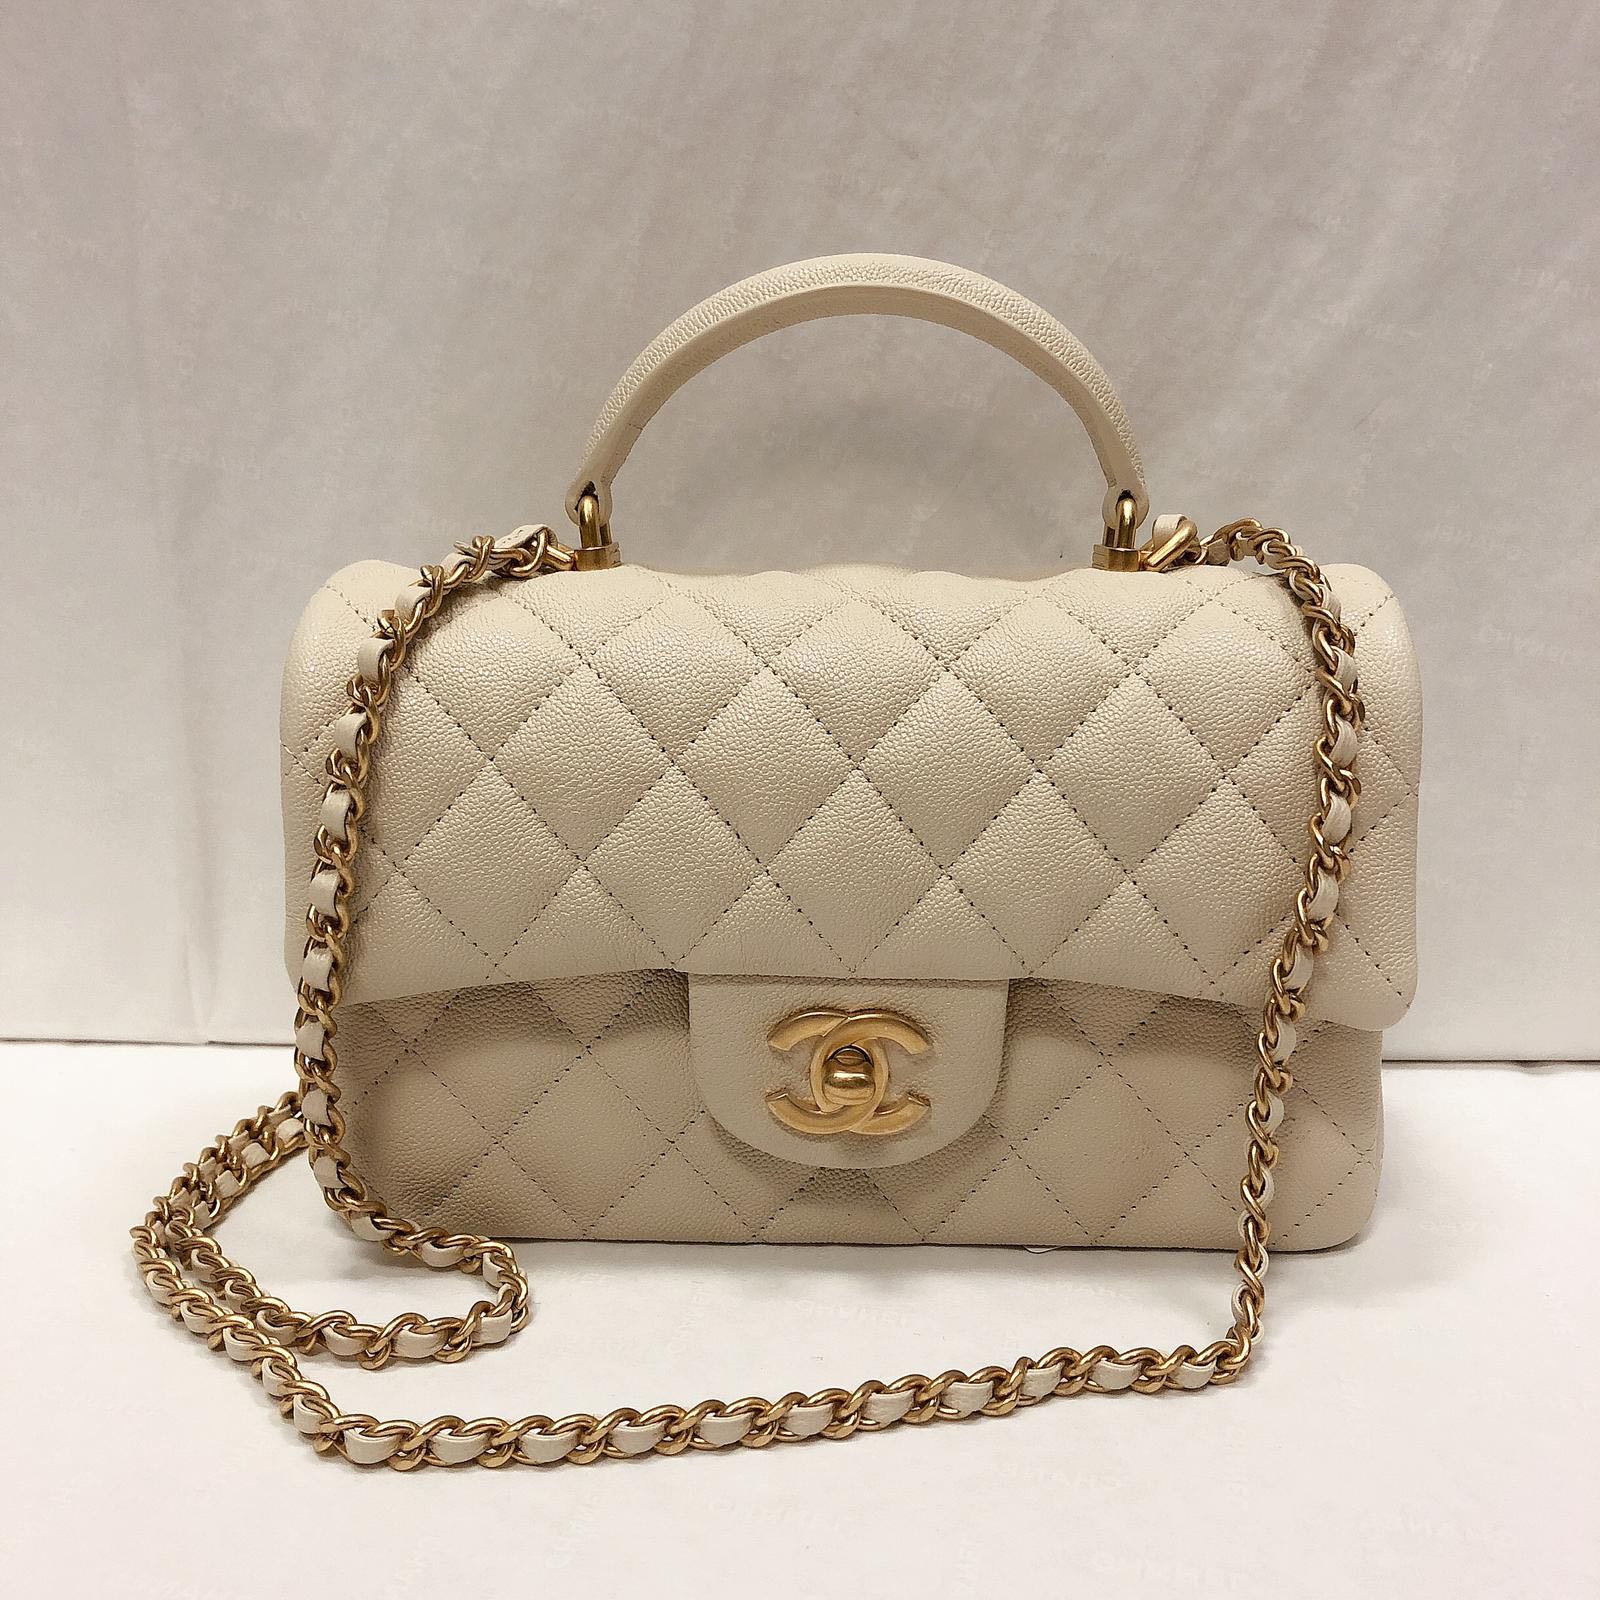 Chanel #CHANELSpringSummer Mini Flap Bag With Top Handle BAGAHOLICBOY